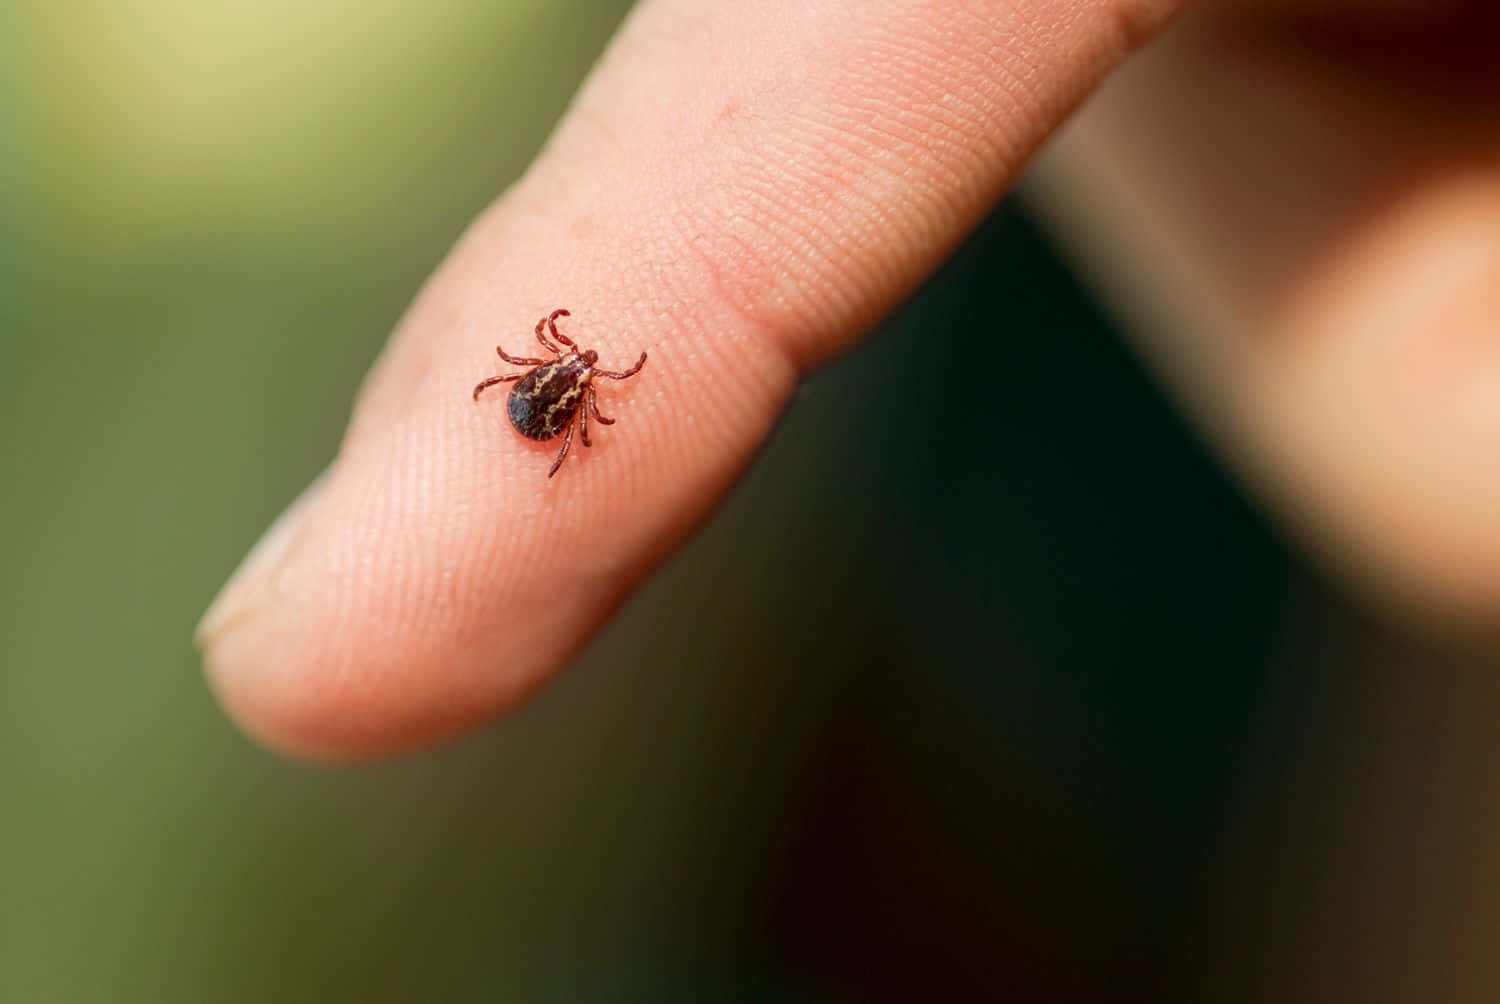 A high-resolution image of a tick up-close